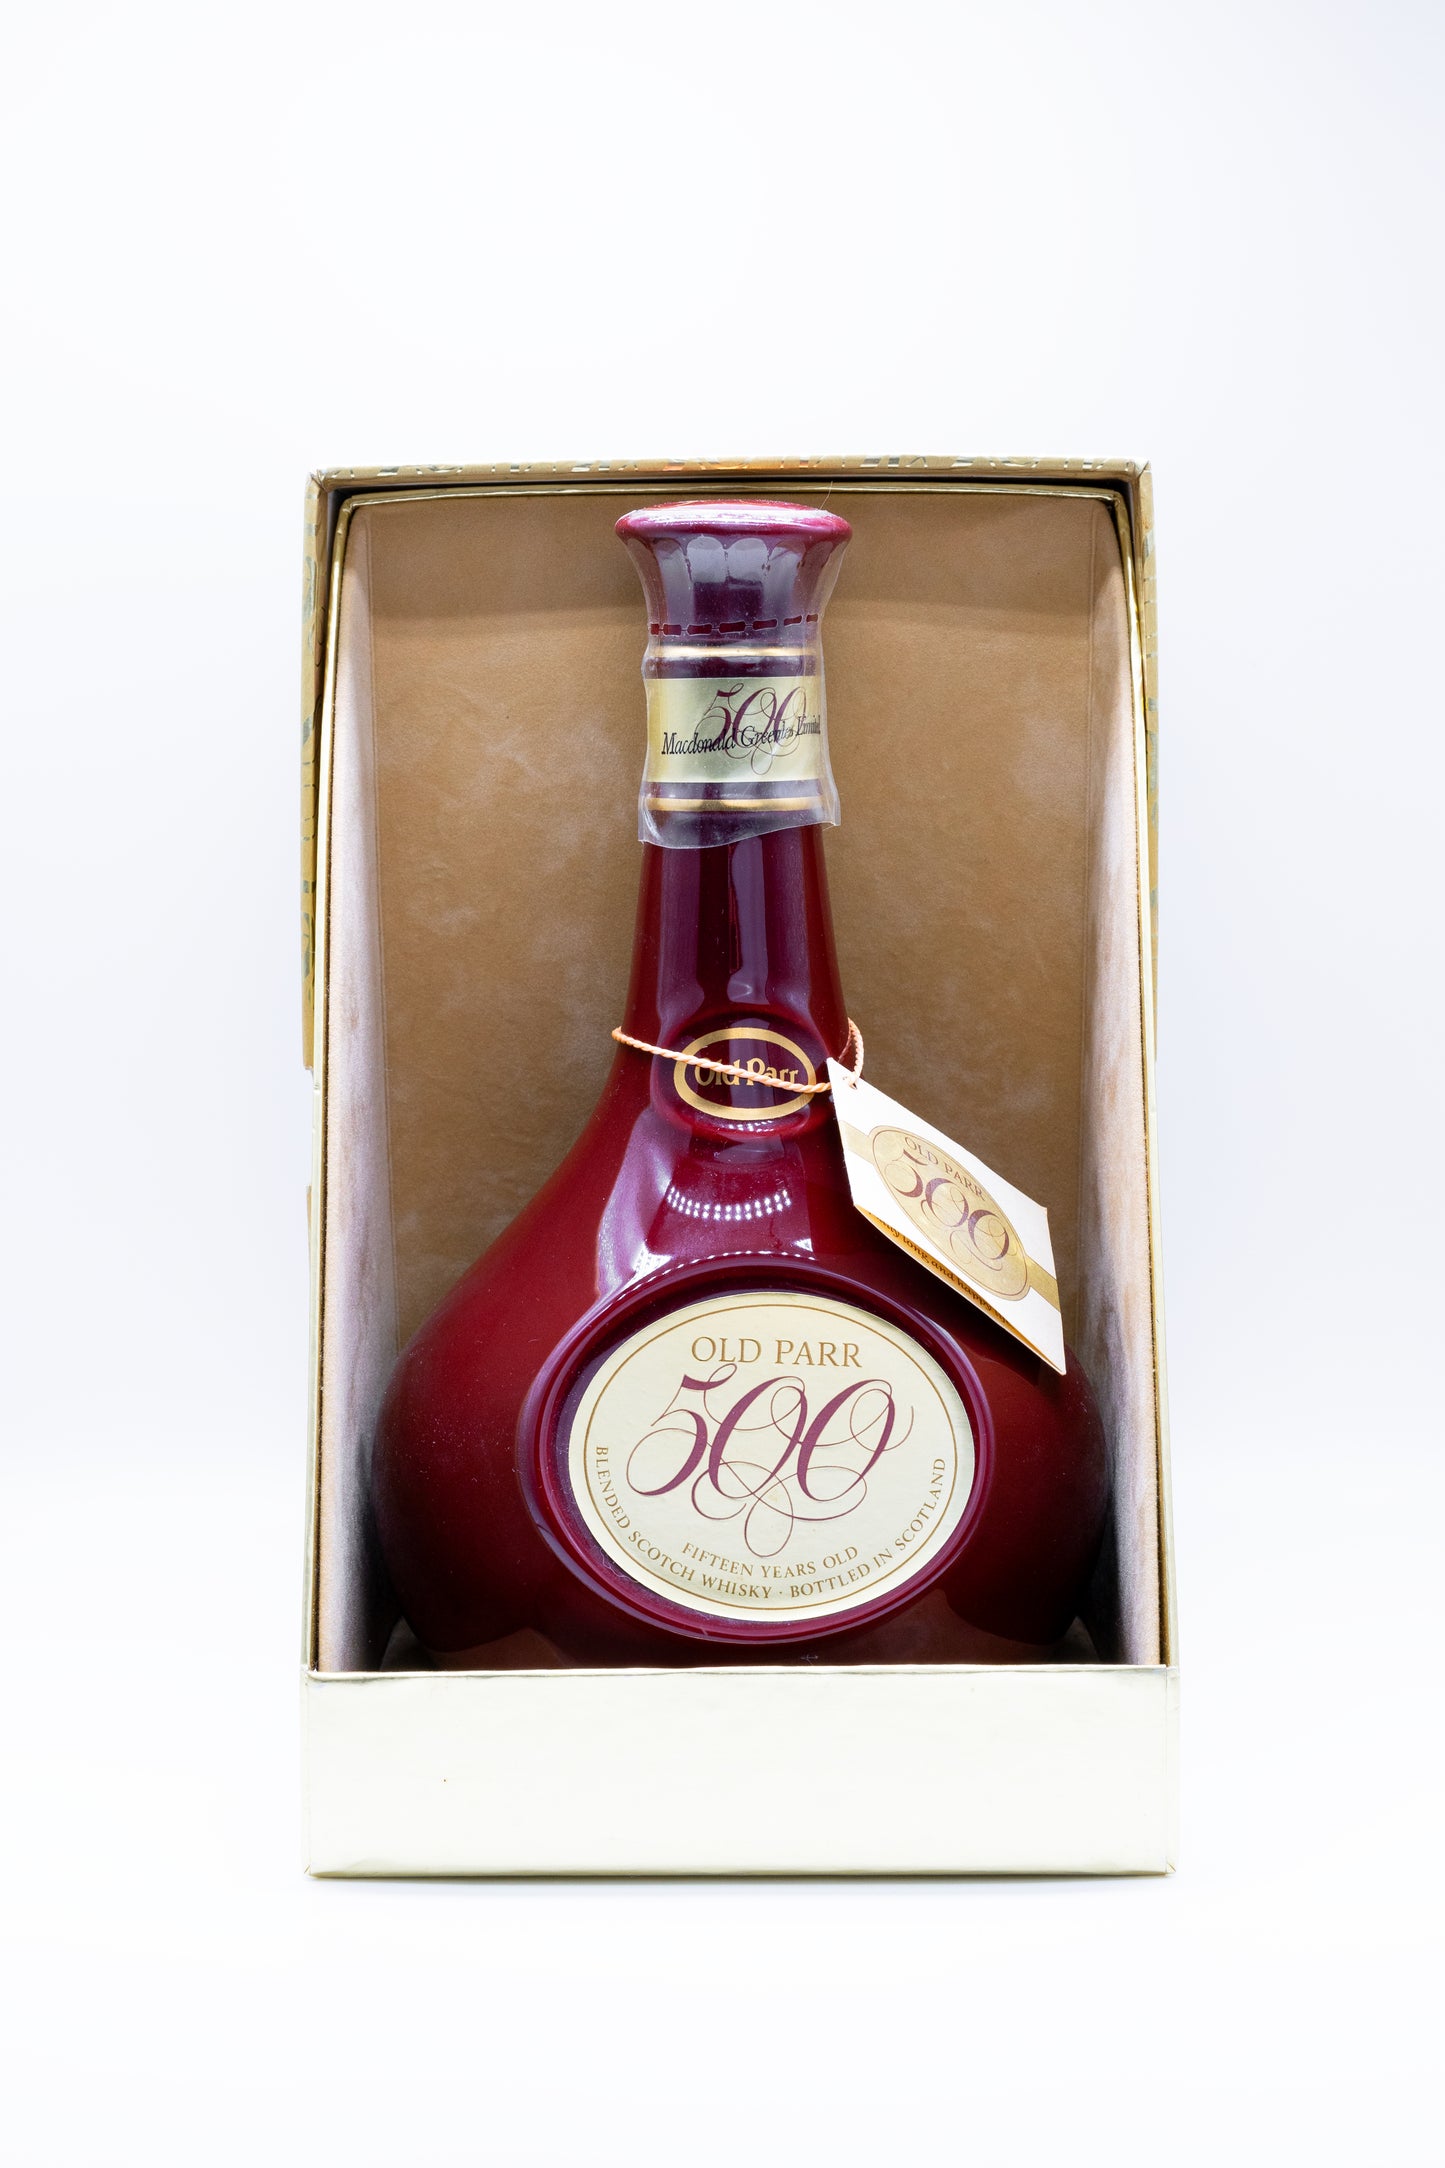 Old Parr 500 Decanter 15 year old